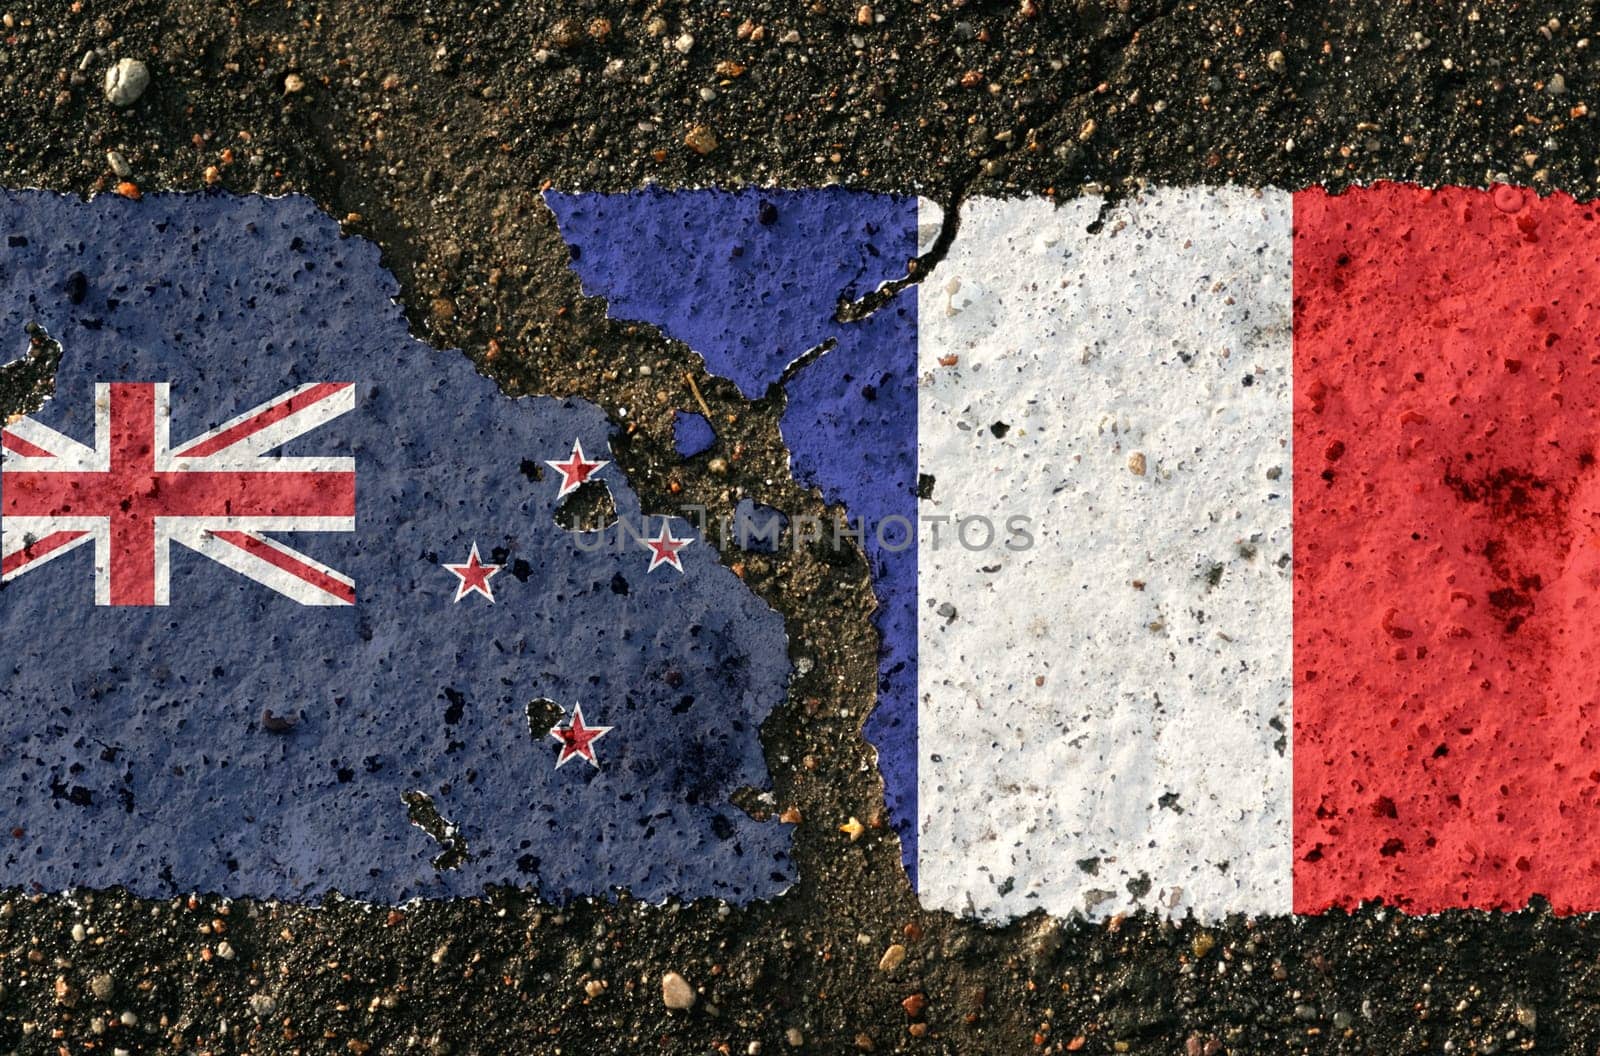 On the pavement are images of the flags of New Zealand and France, as a symbol of confrontation. by Sd28DimoN_1976